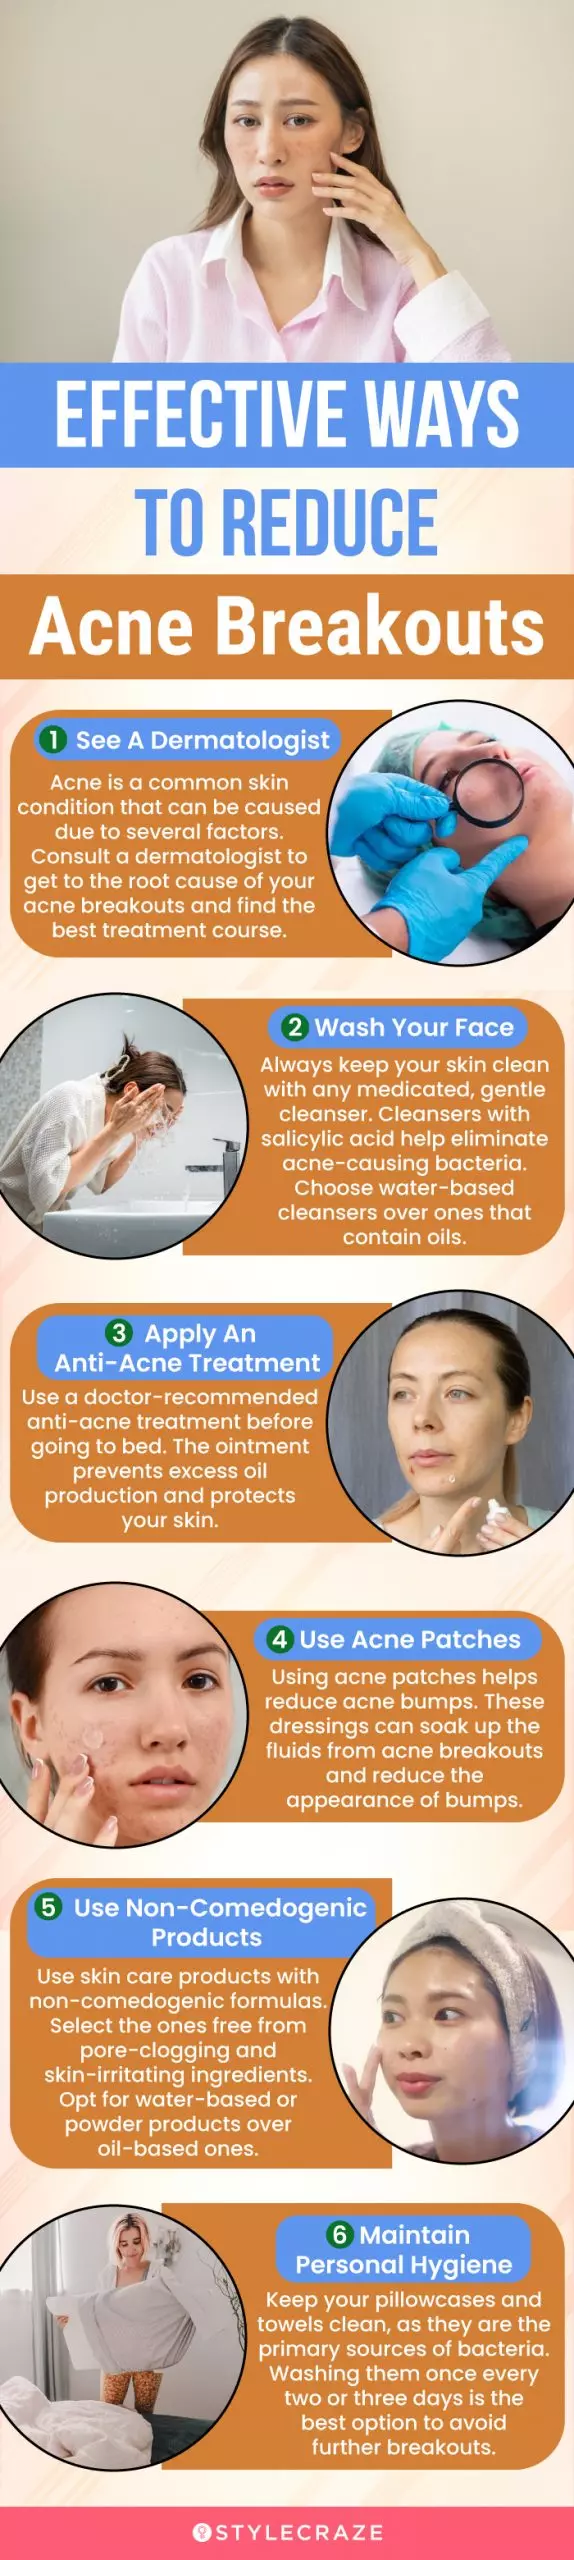 effective ways to reduce acne breakouts (infographic)